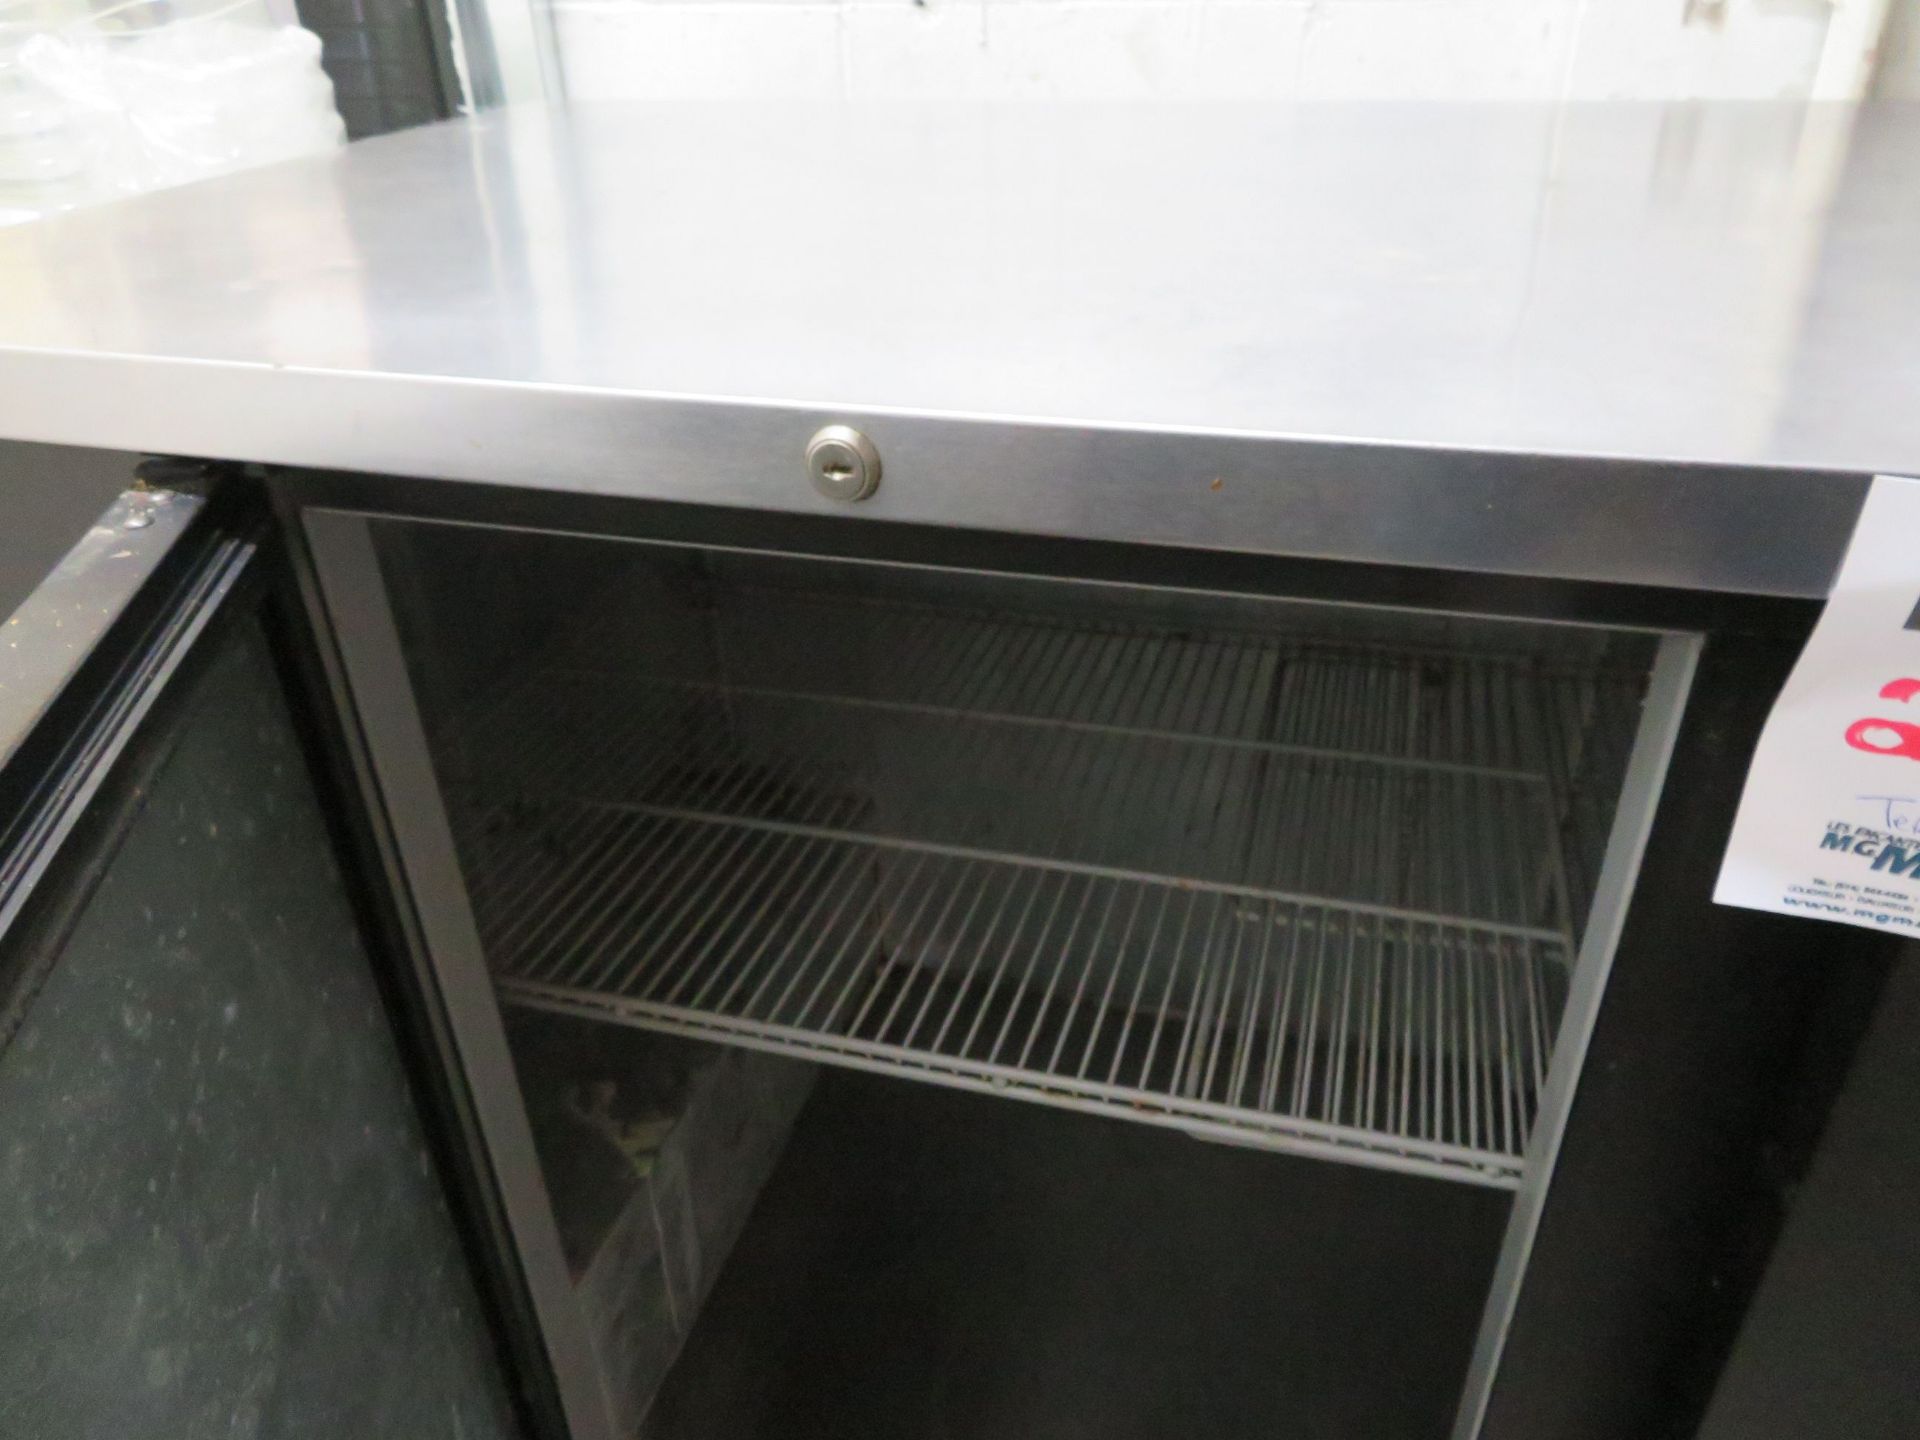 2 door refrigerated cooler unit with built-in compressor, approx. 59"w x 28"d x 37"h - Image 2 of 2